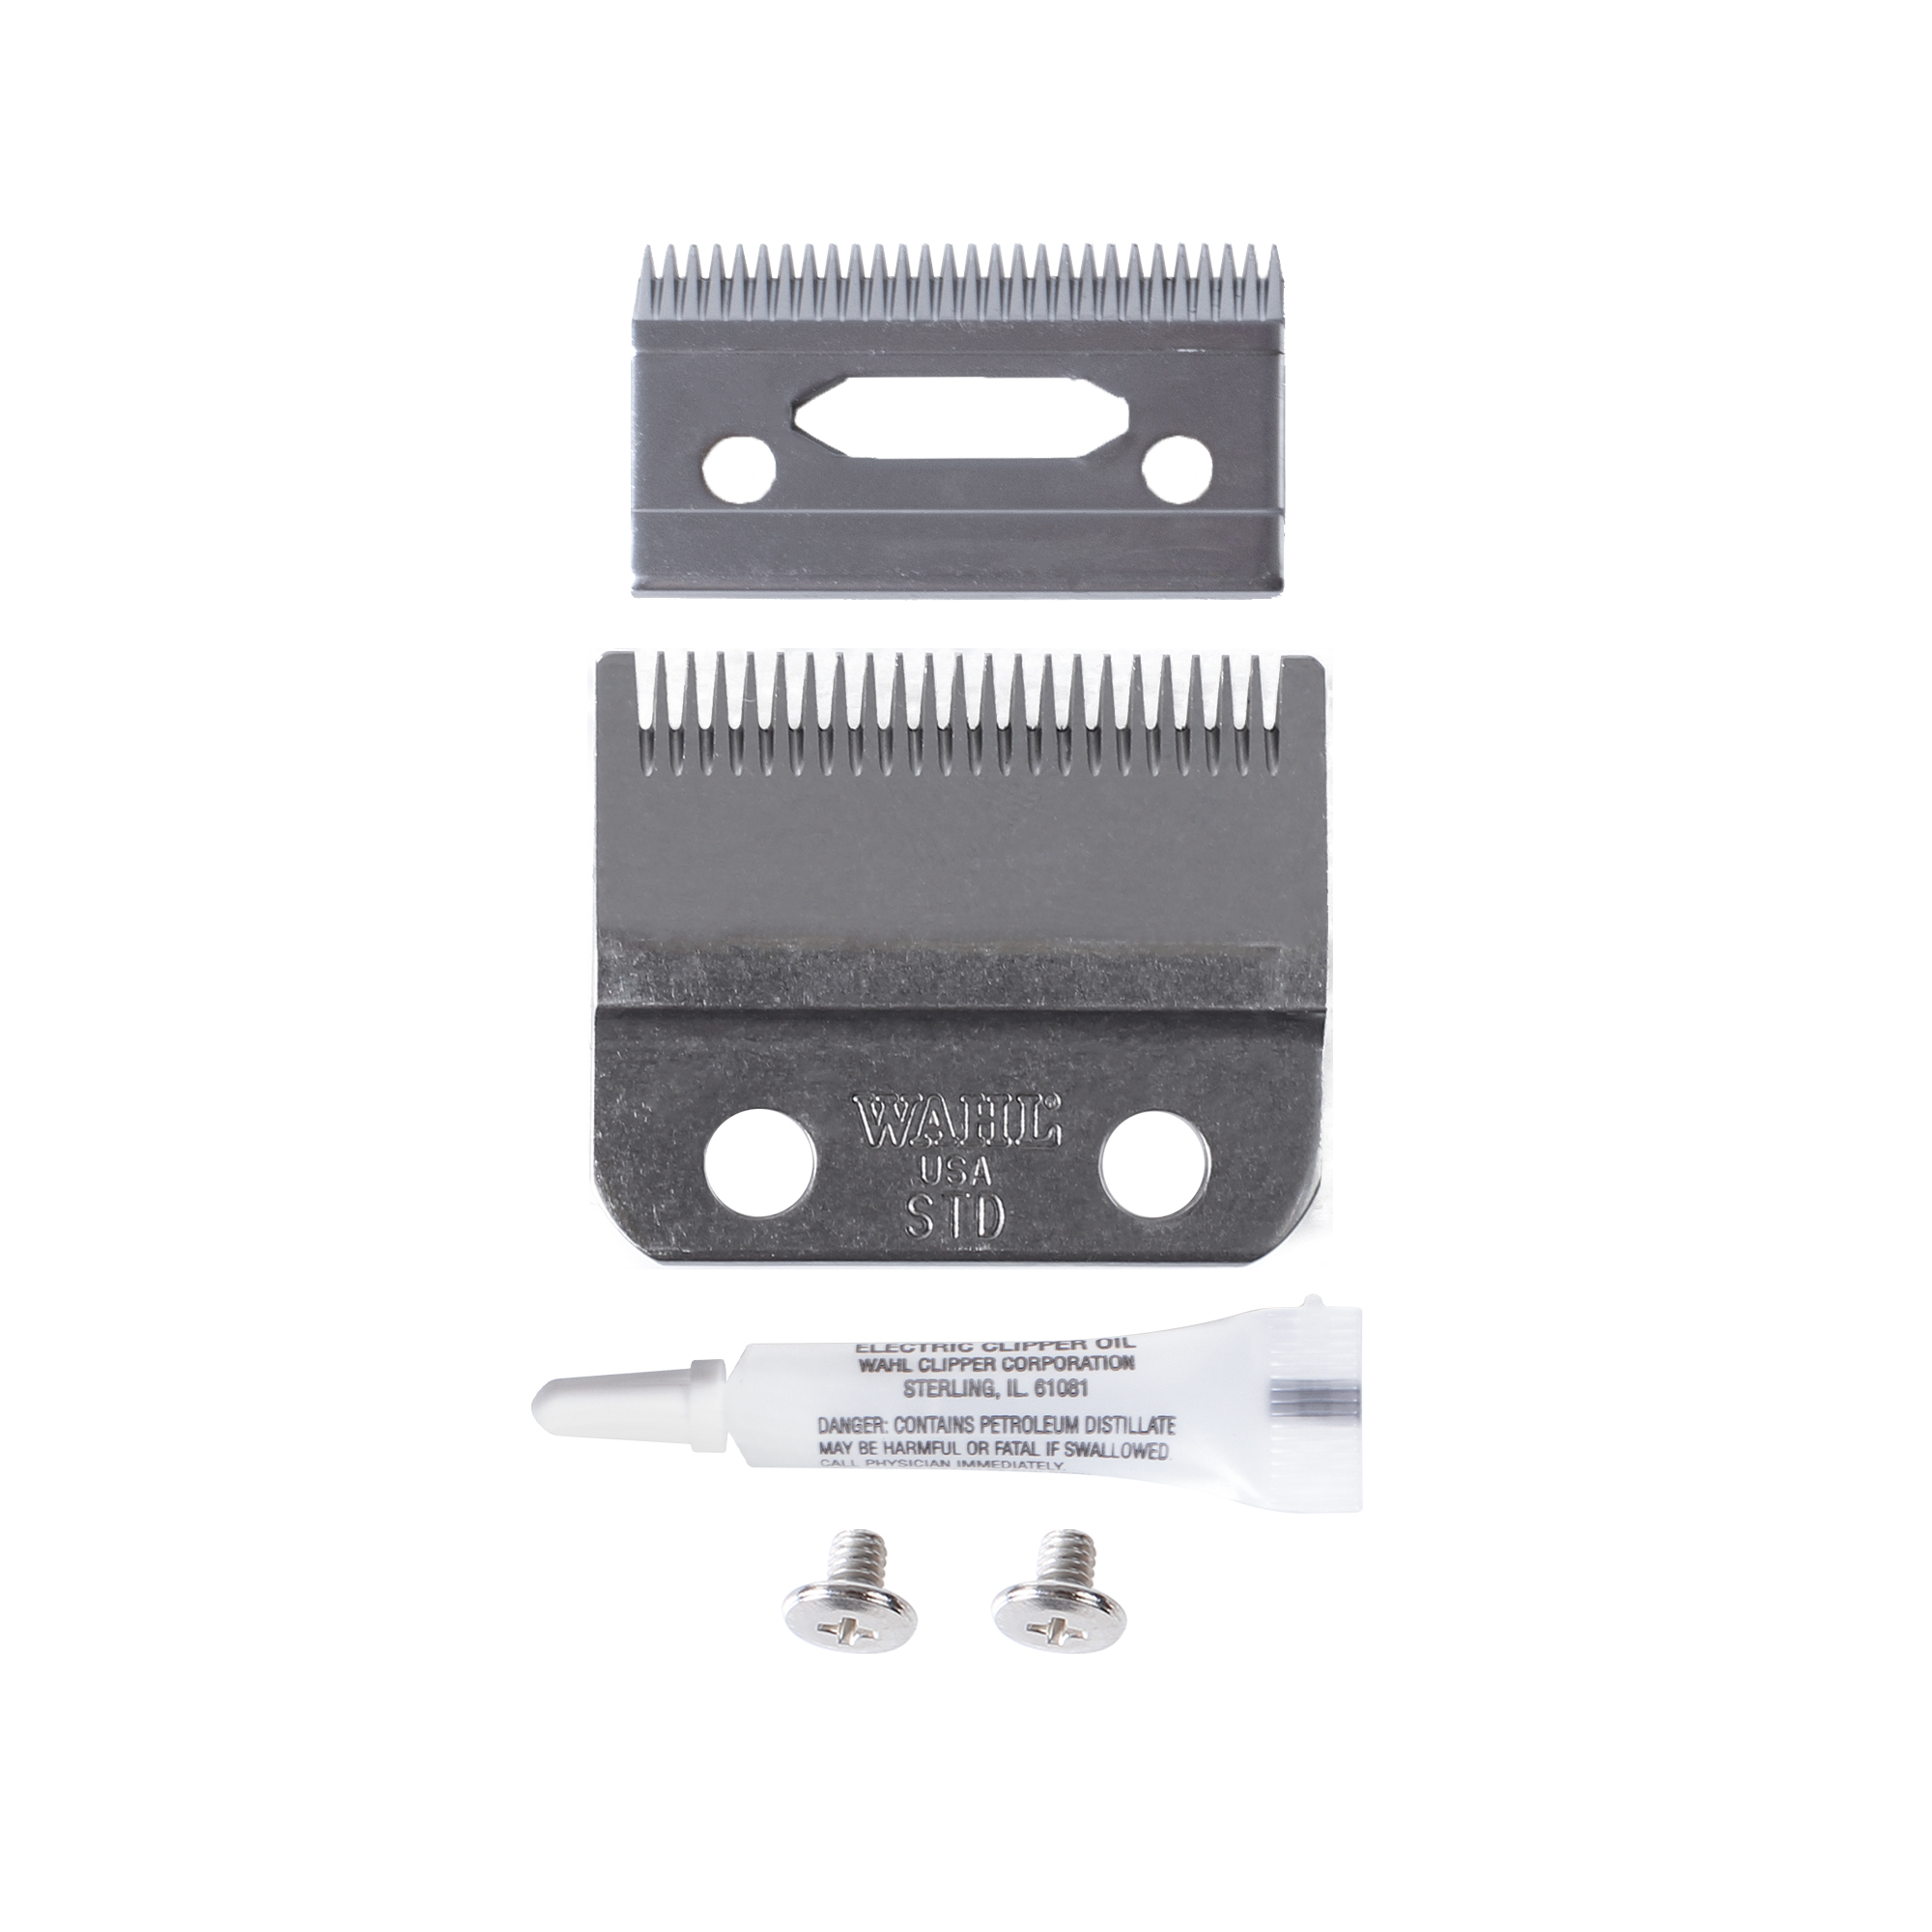 wahl senior clipper replacement blades